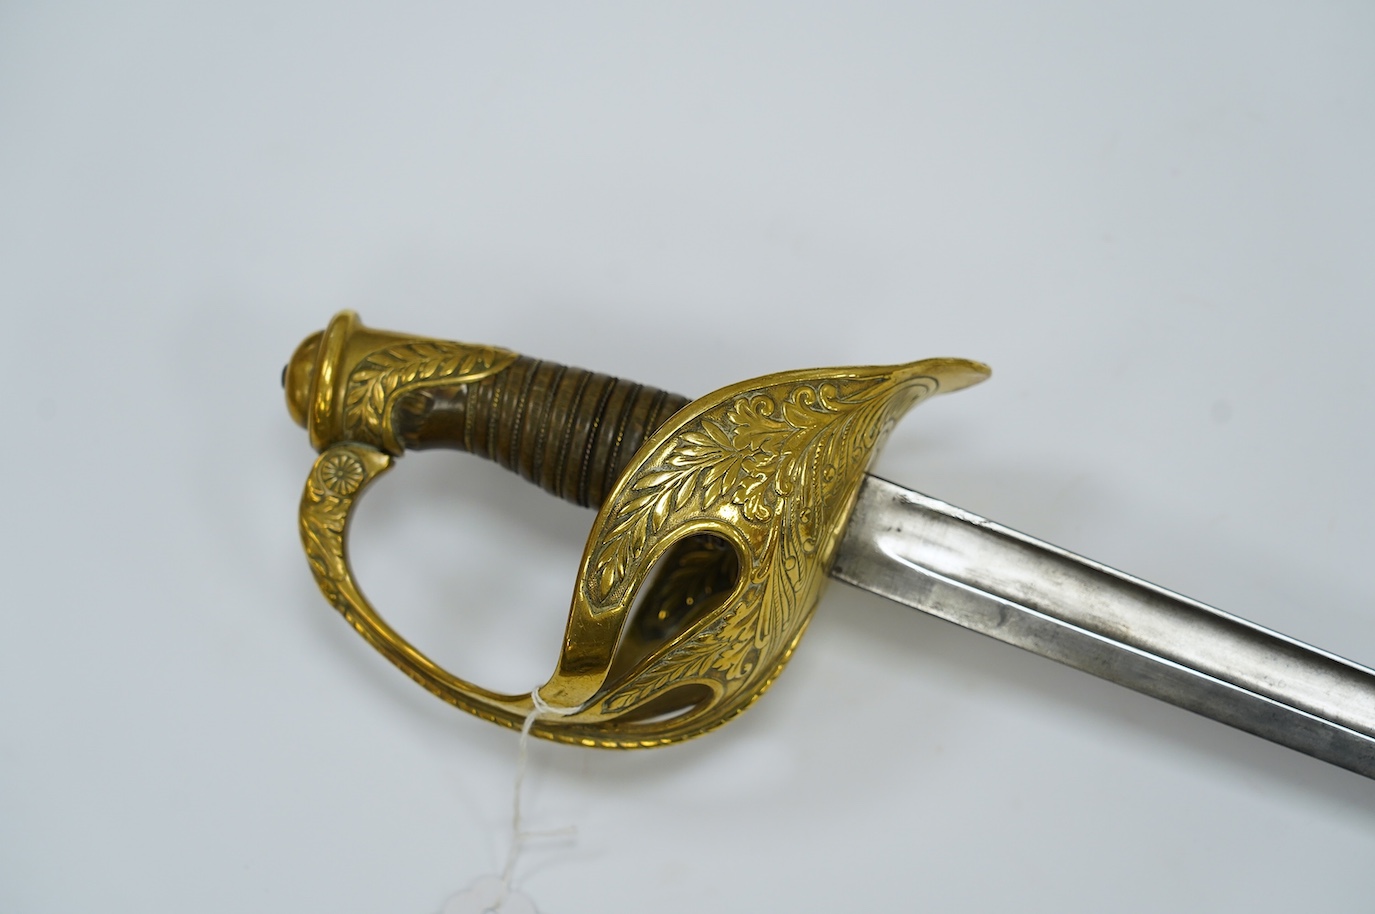 A French 1890 Cuirassier’s sword, brass boat shaped guard with foliage in relief, wirebound horn grip 'Medusa's Head Motif' to thumb scroll, blade 92.5cm. Condition - good